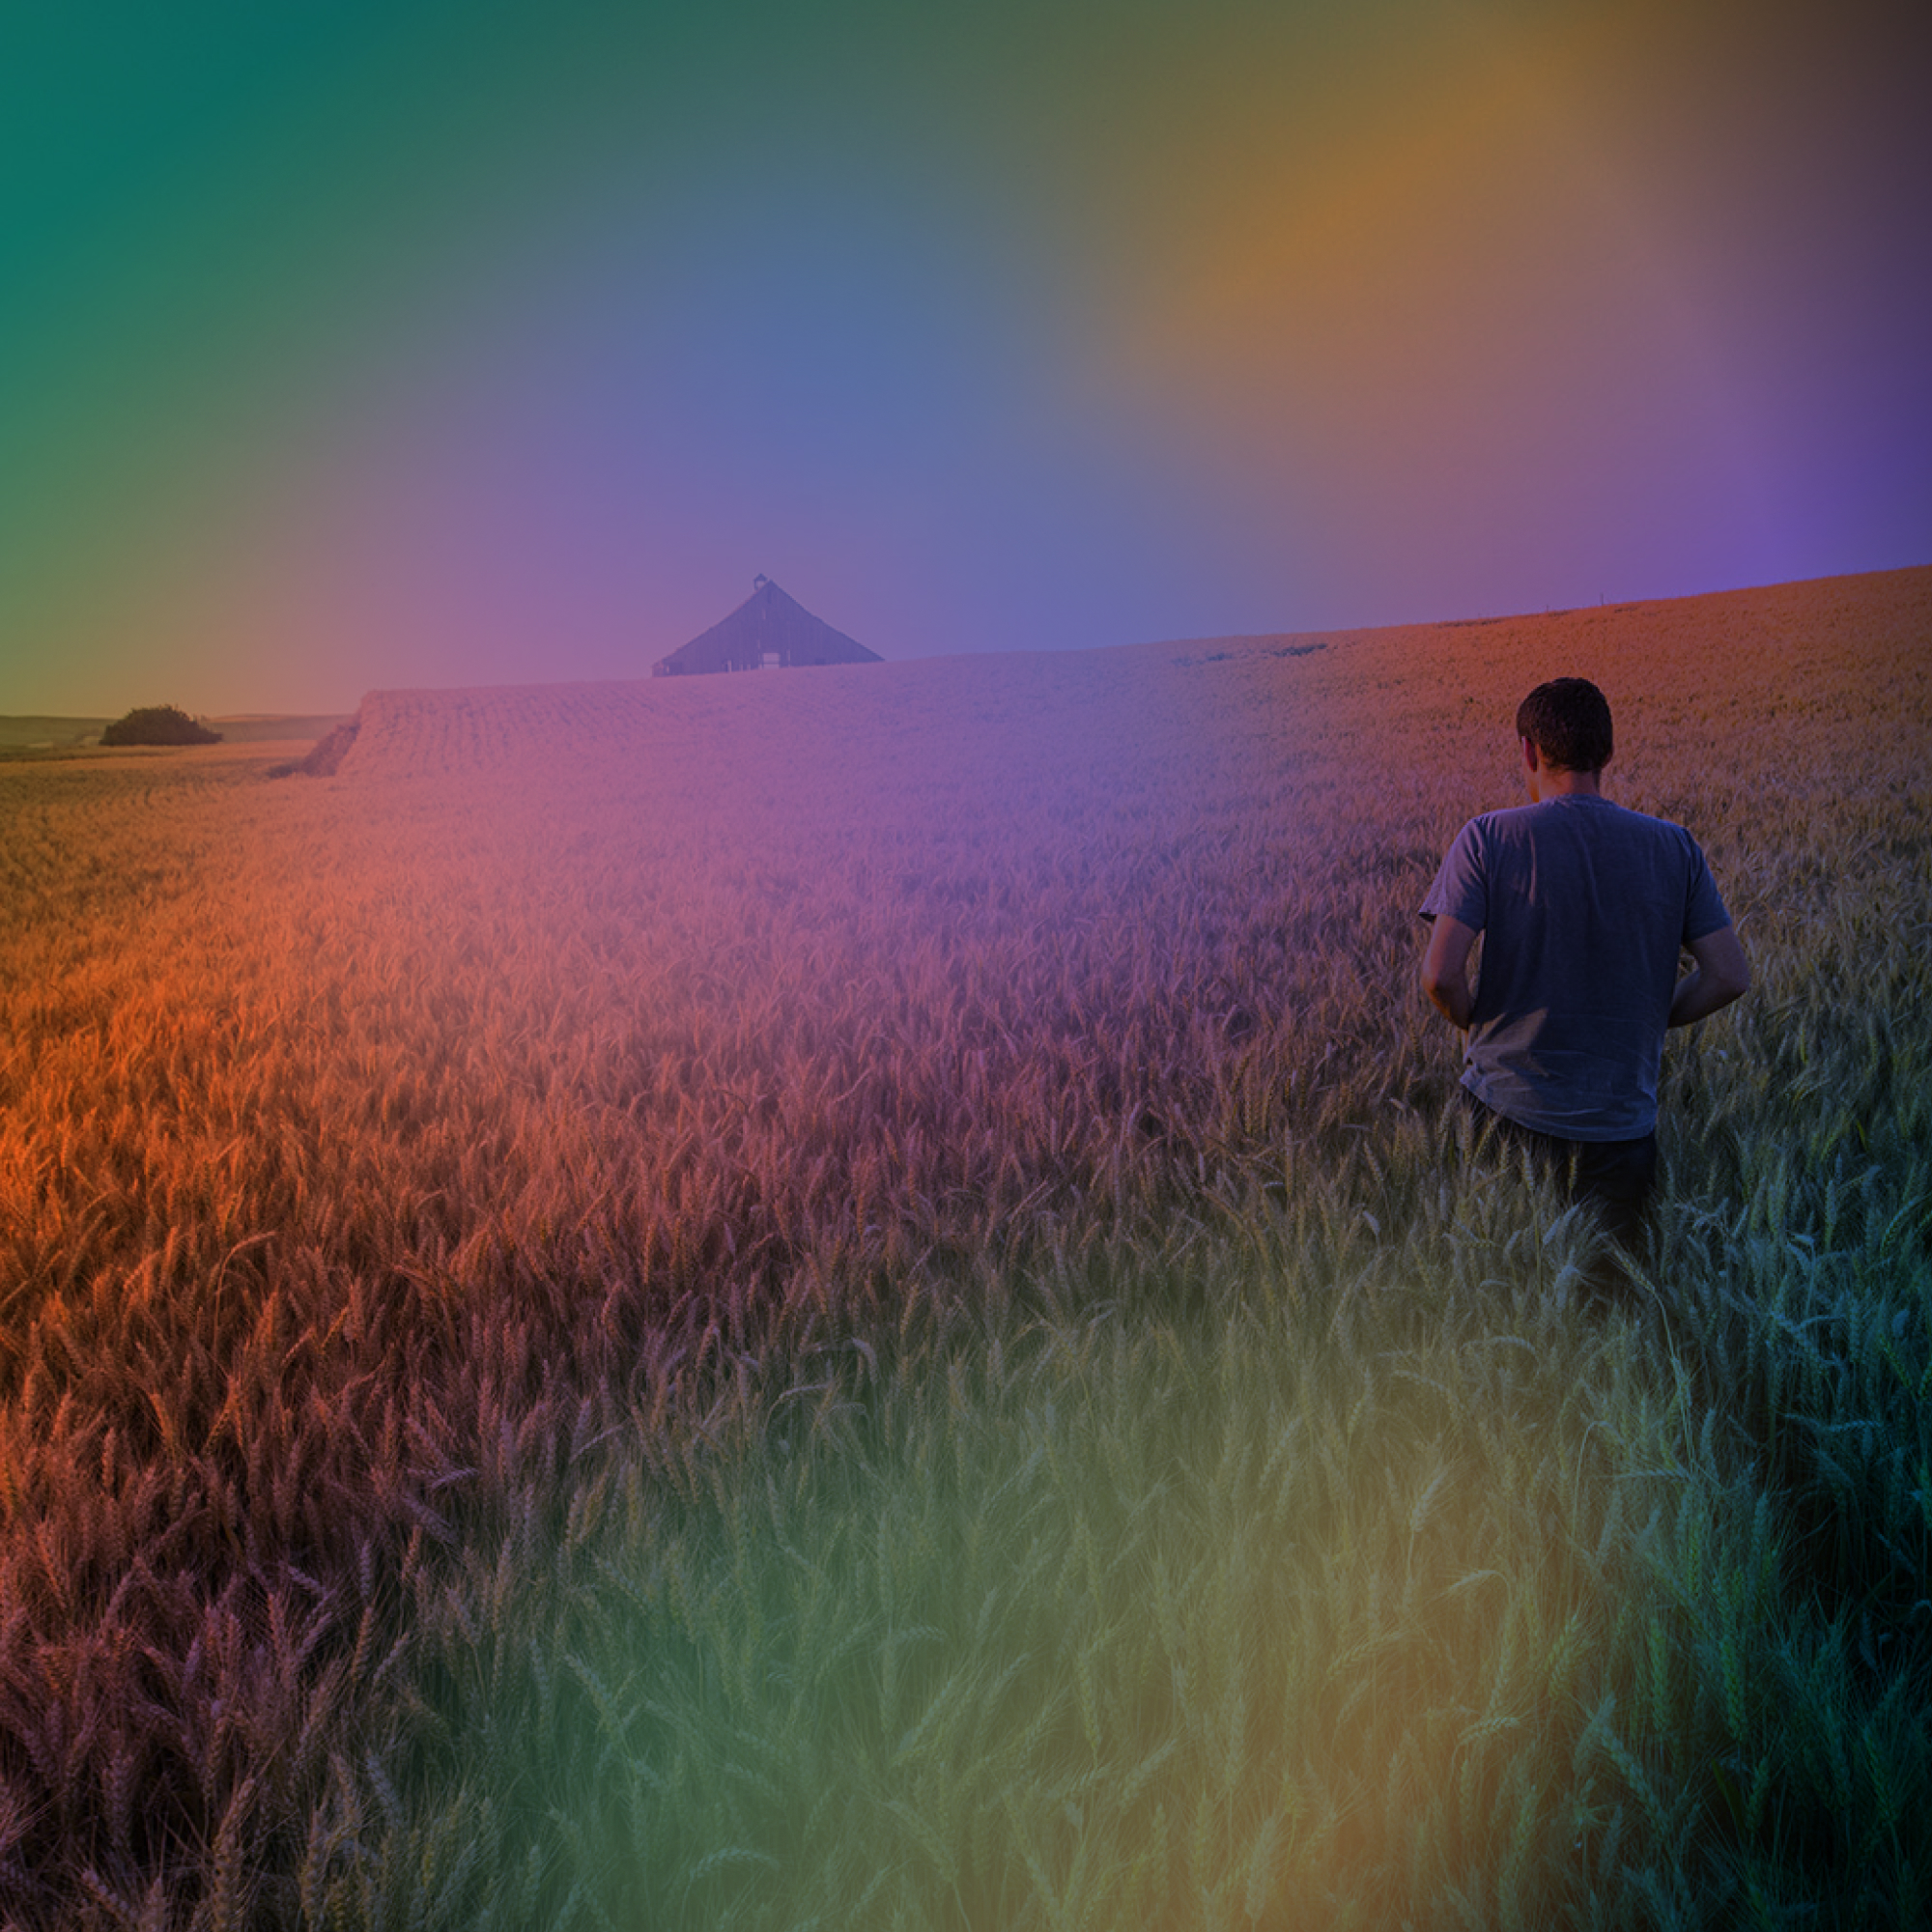 A man stands out in a field of wheat